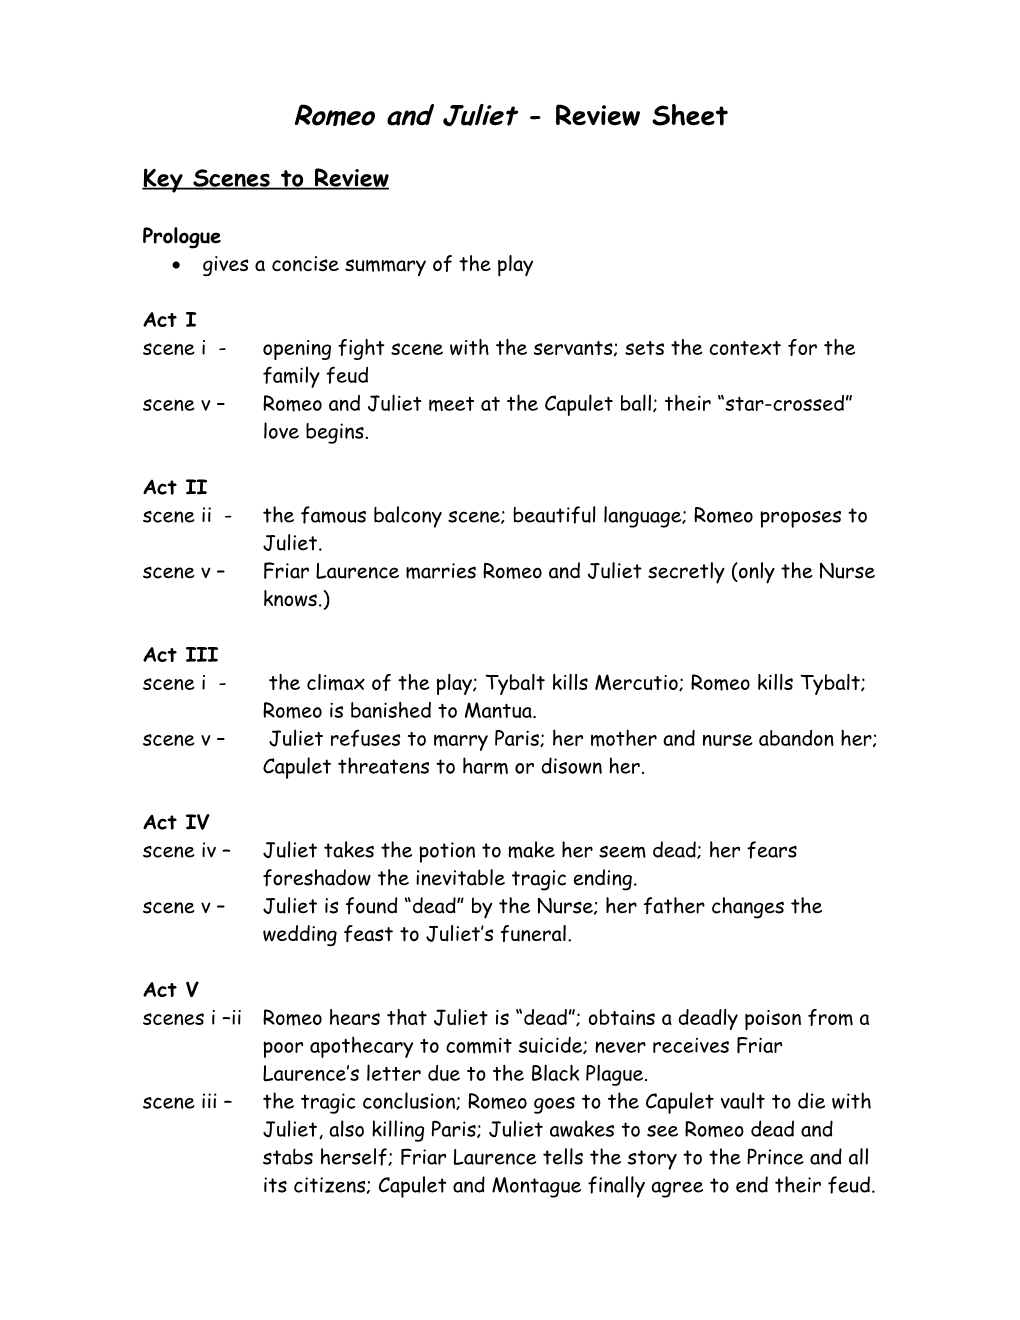 Romeo and Juliet - Review Sheet